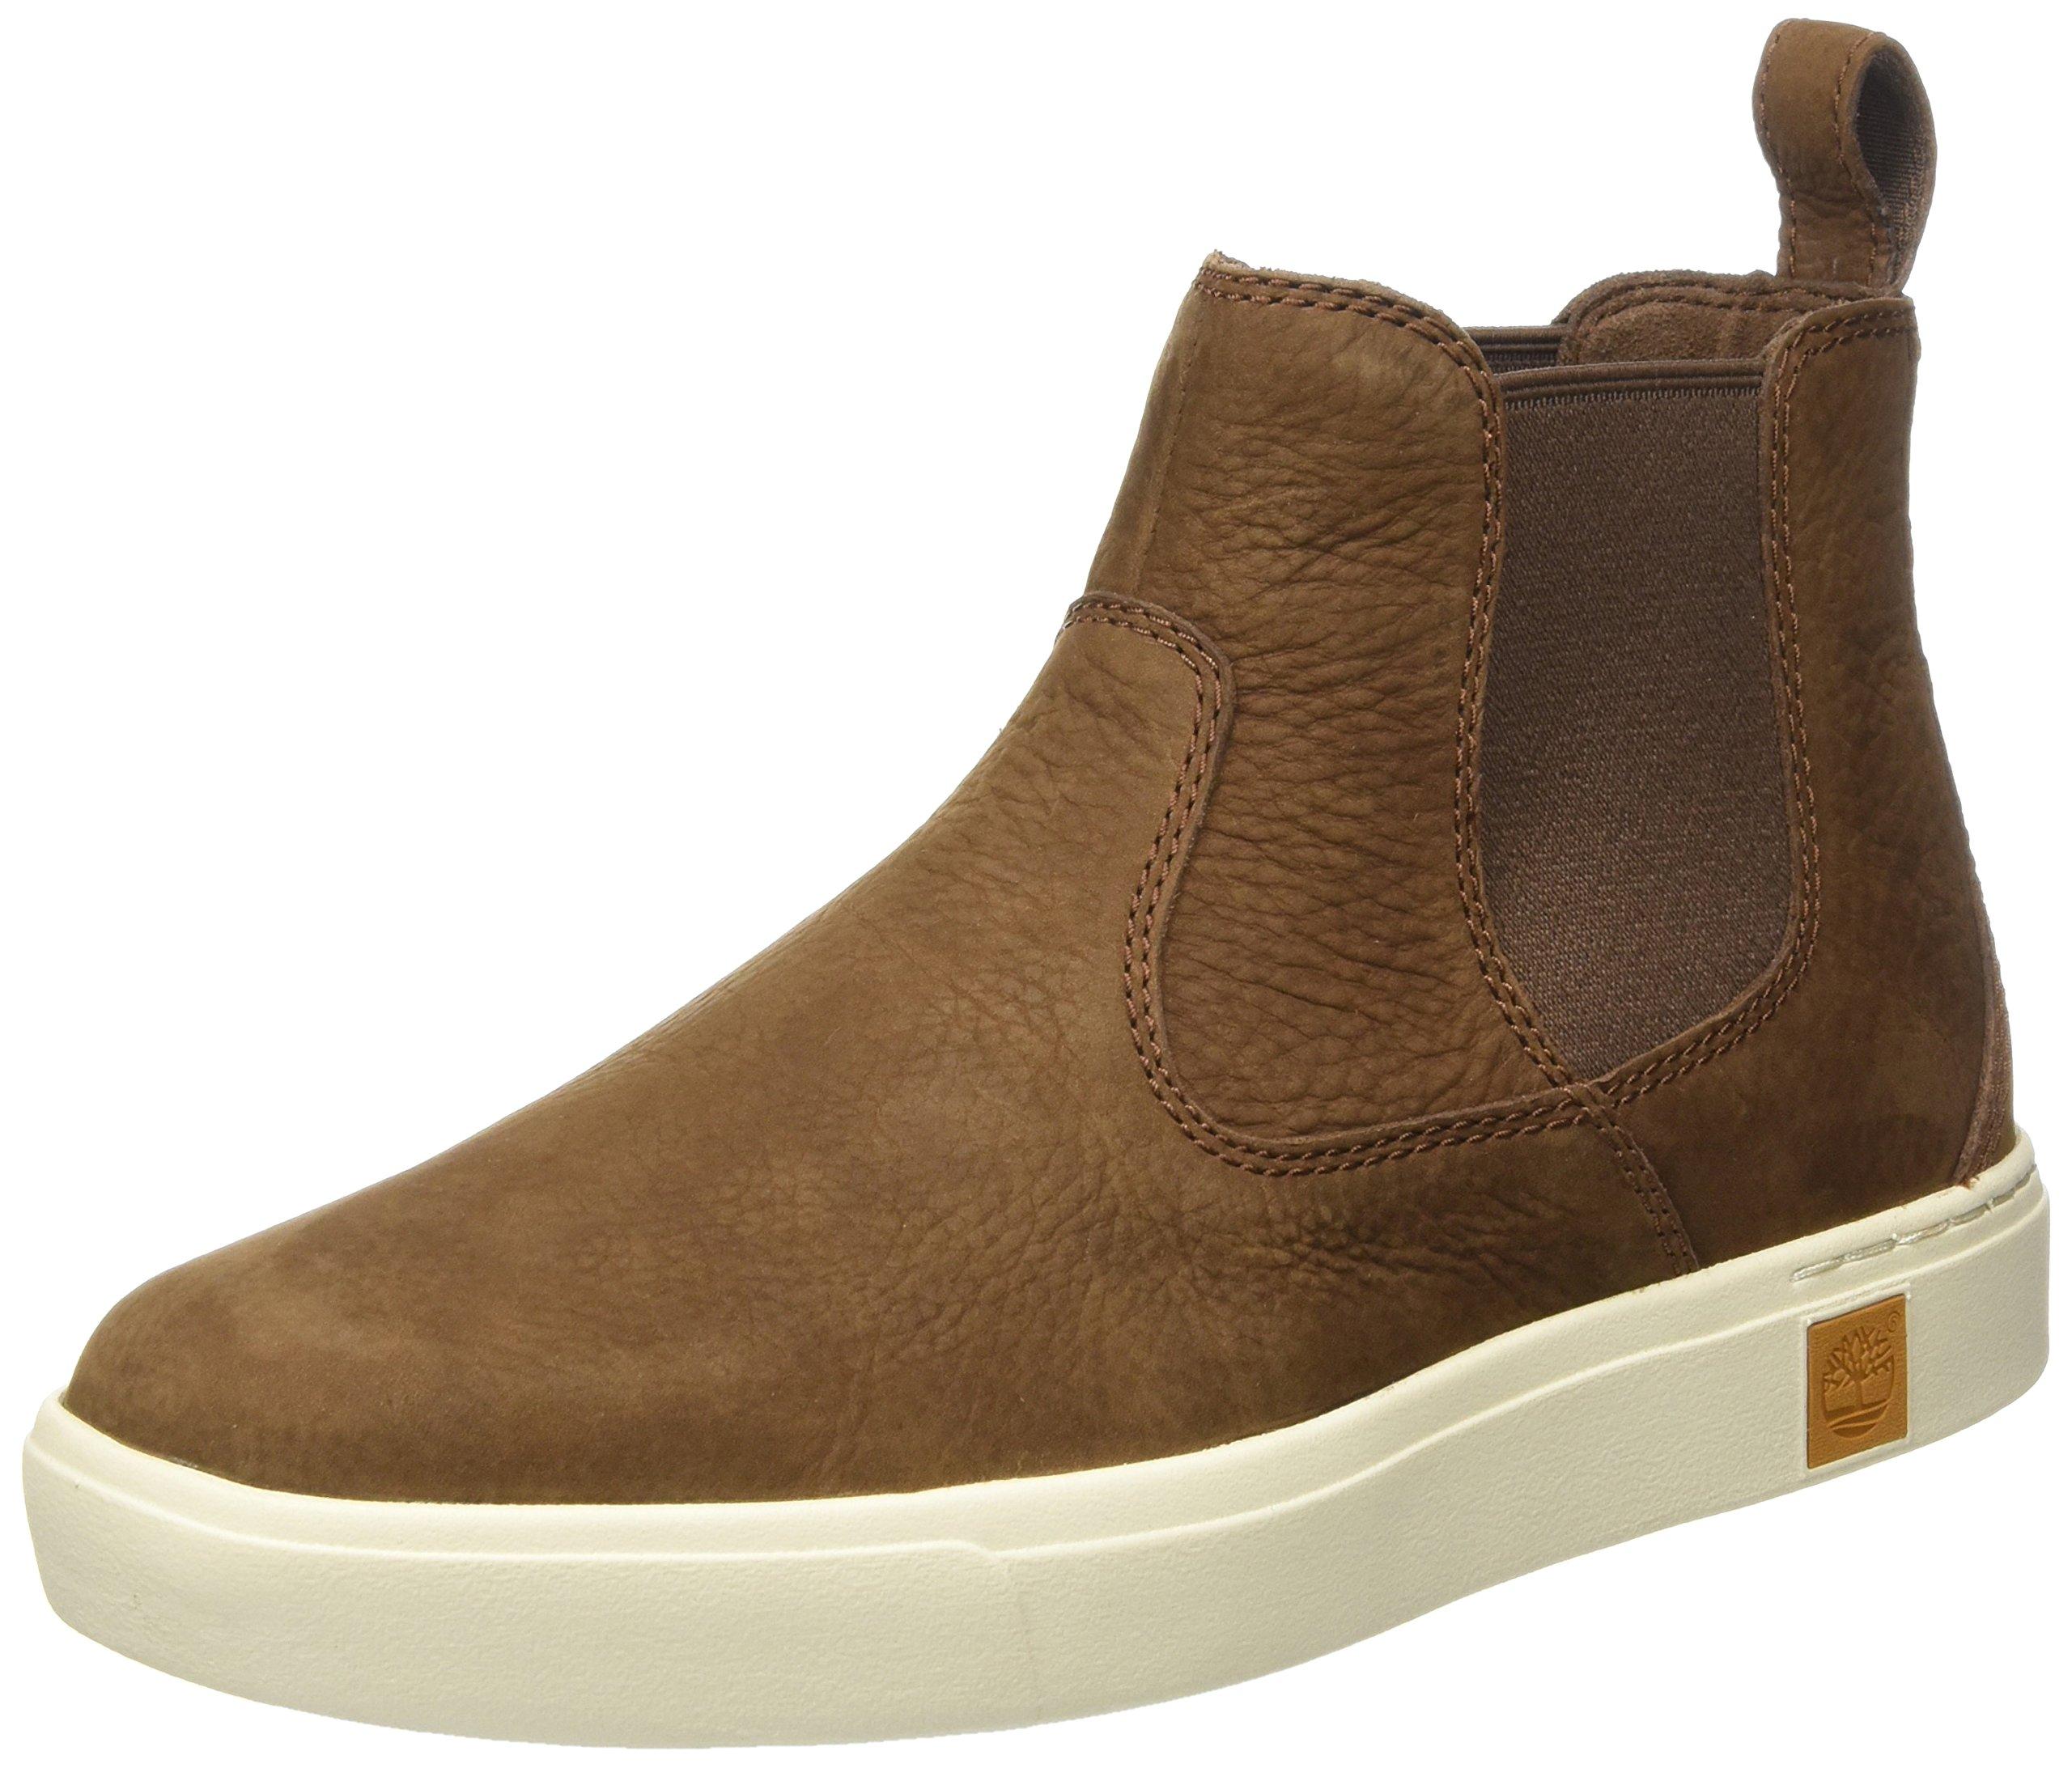 Timberland Amherst Sensorflex Chelsea Boots in Brown for Men - Lyst